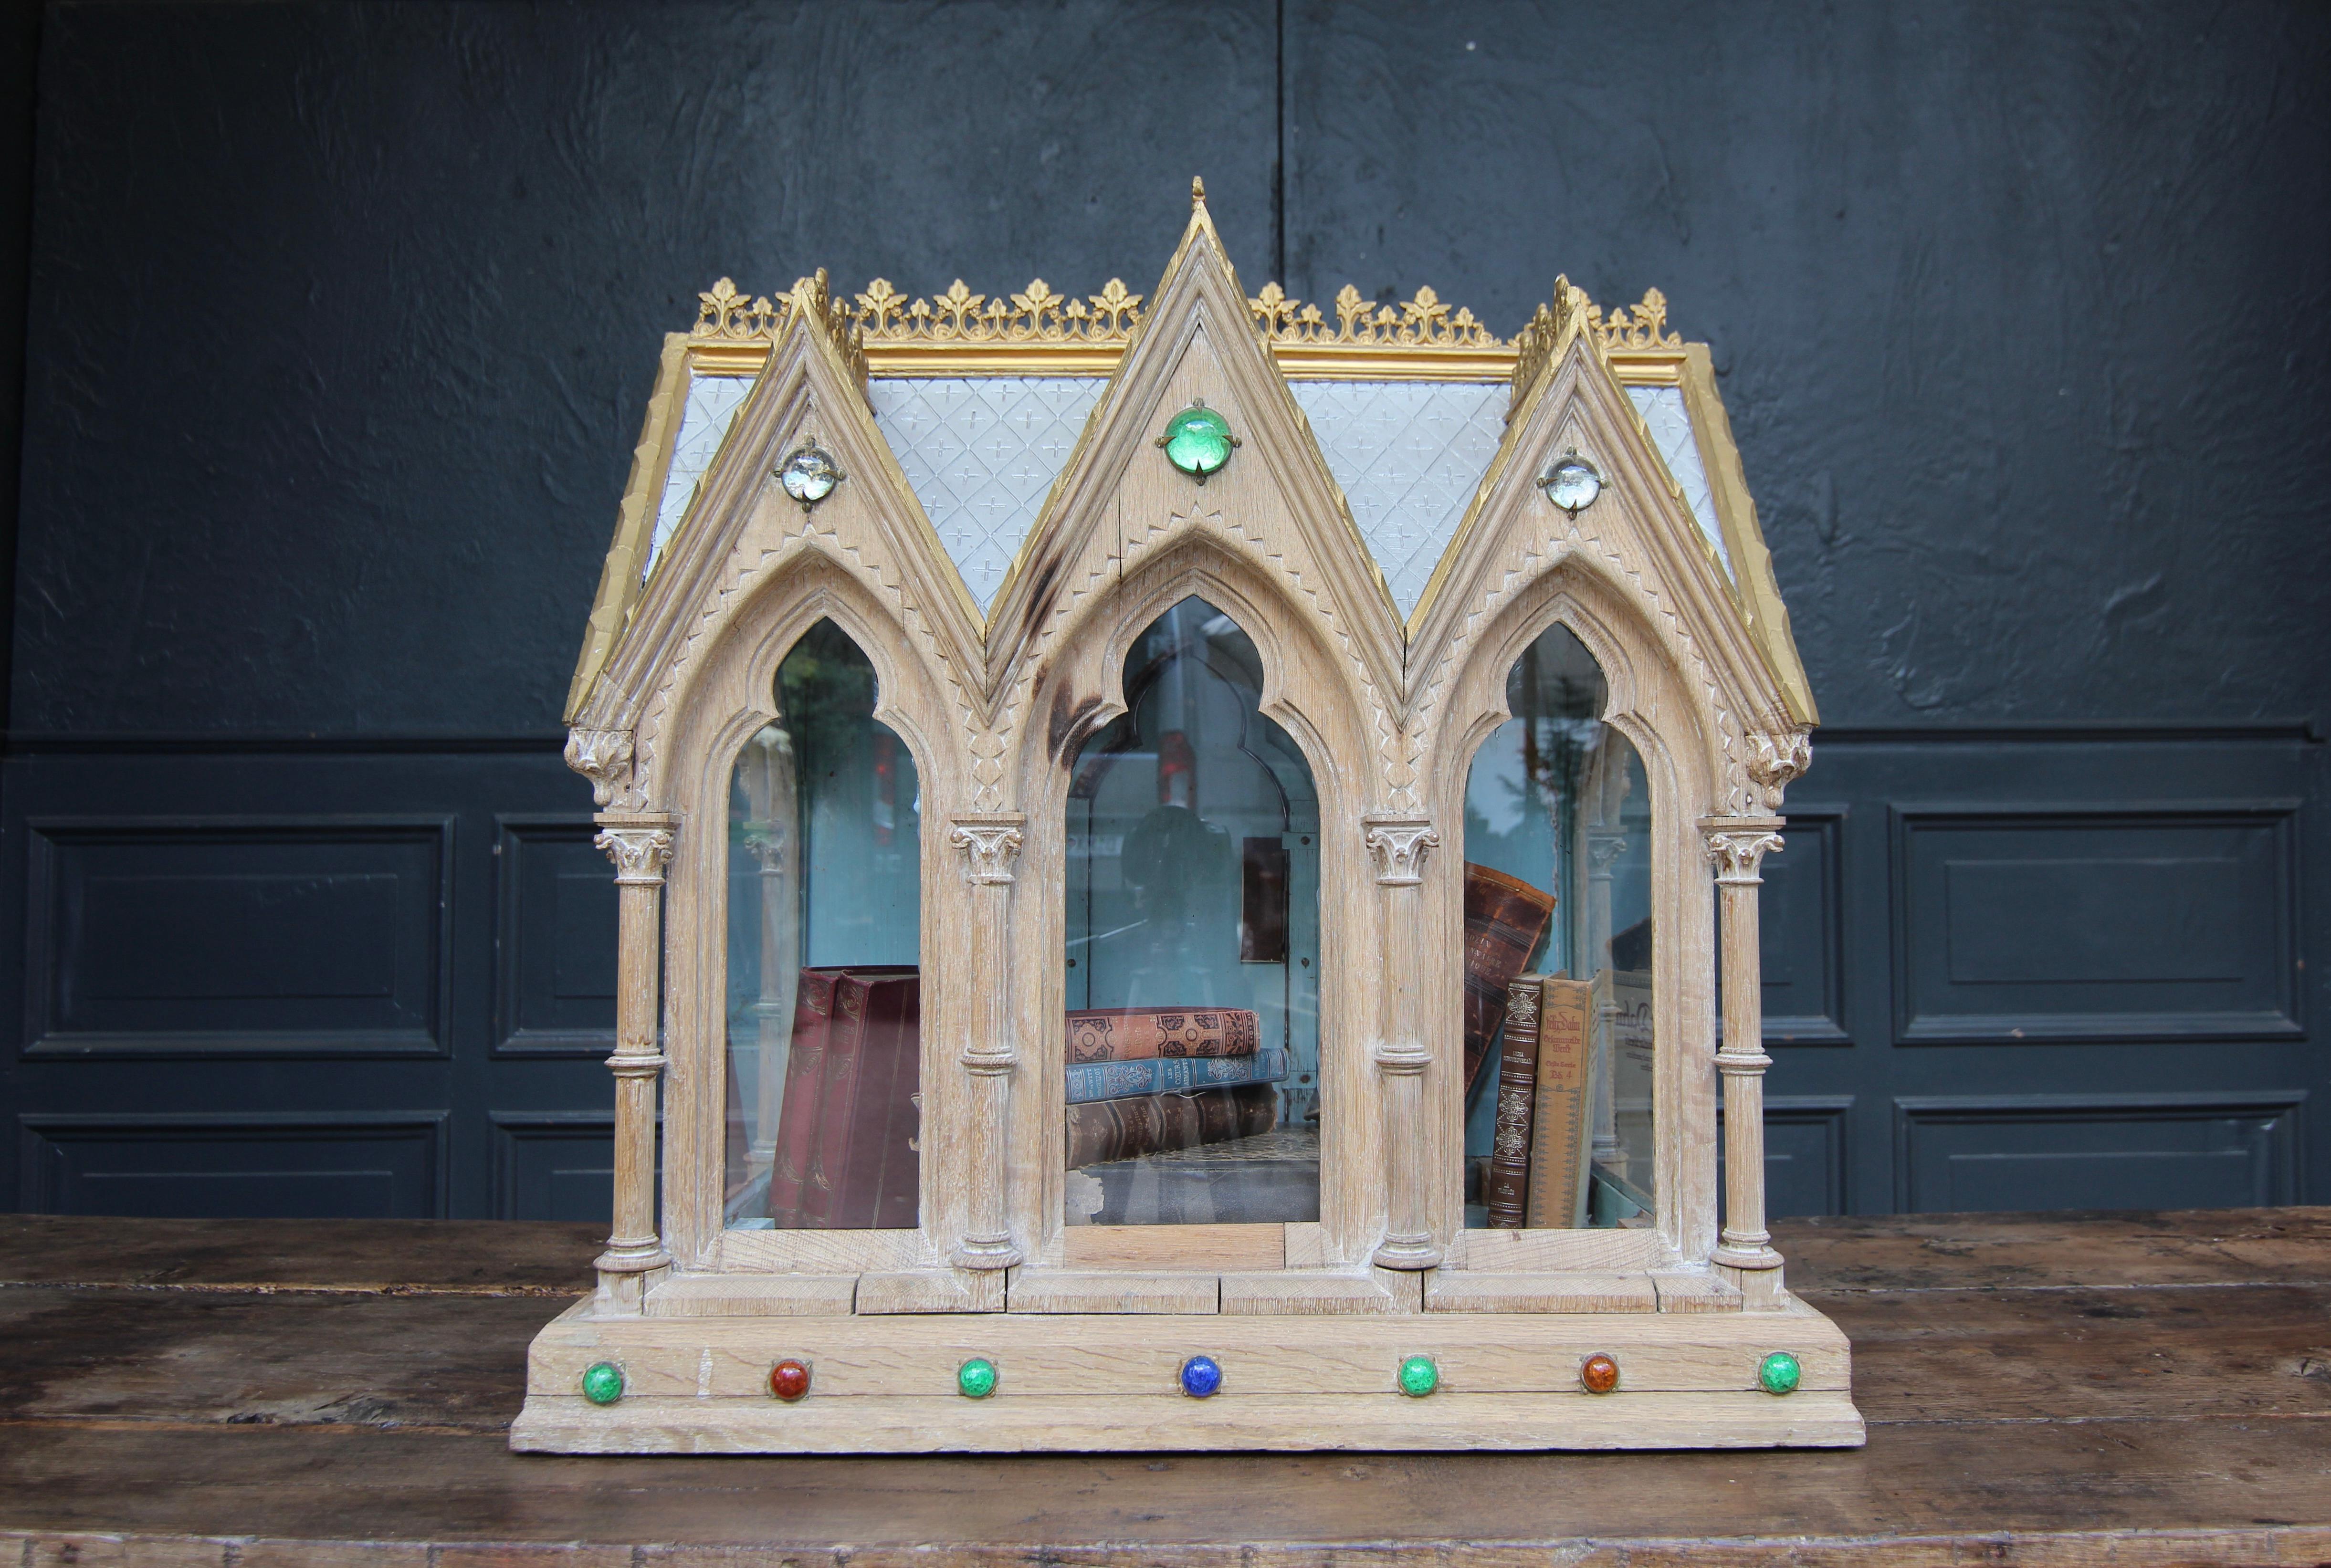 A Gothic Revival reliquary. Circa late 19th / early 20th century. Made of solid oak with fine carving.

Reliquaries have been used to store relics since the Middle Ages. In sacred architecture they are often located behind the main altar in the